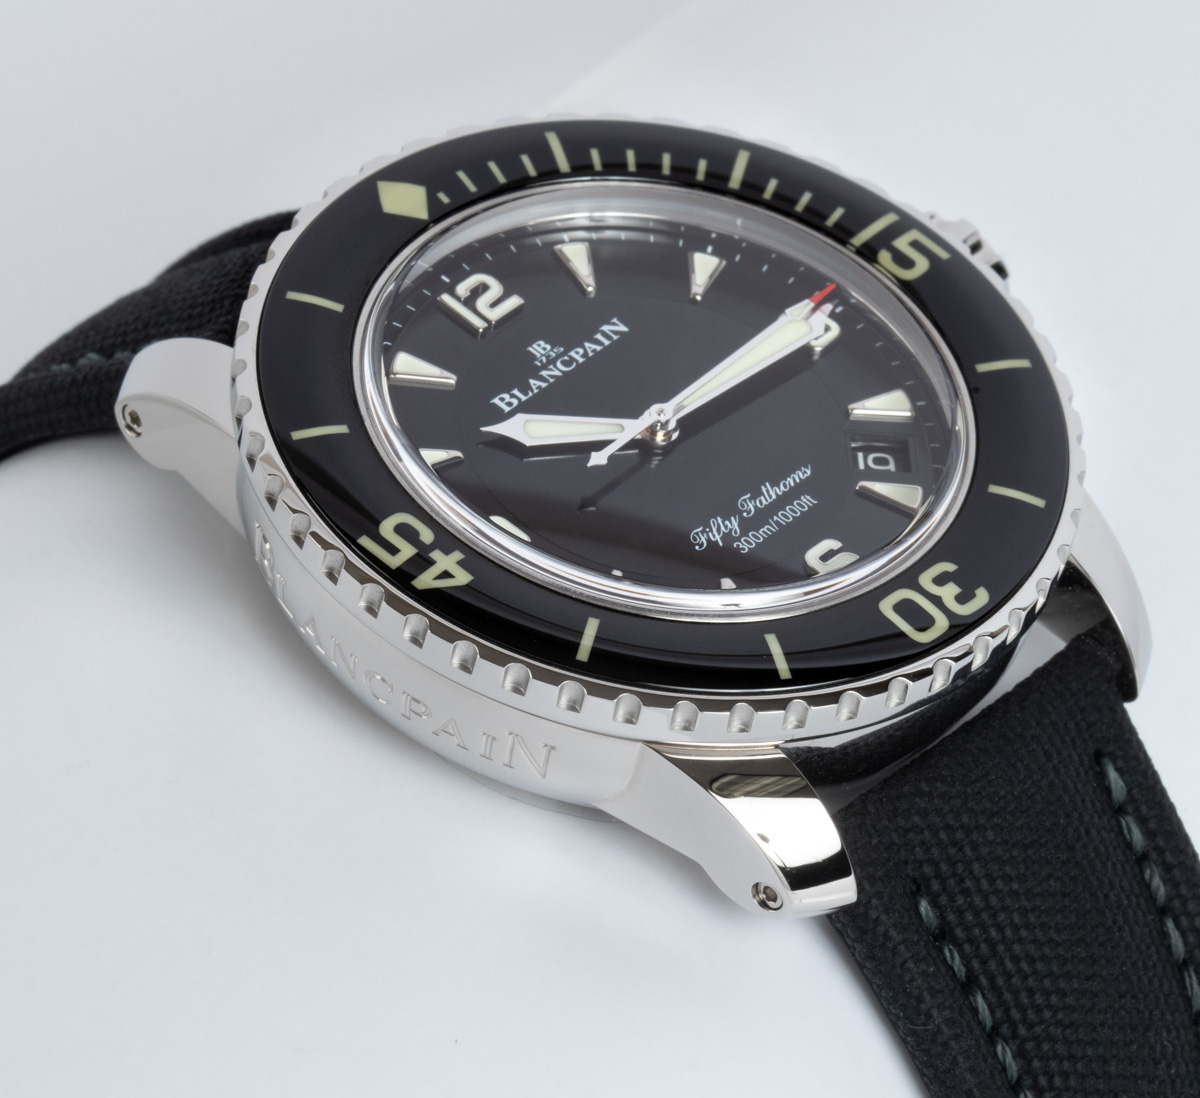 BlancPain Fifty Fathoms : 5015 1130 52A New Watch For Sale